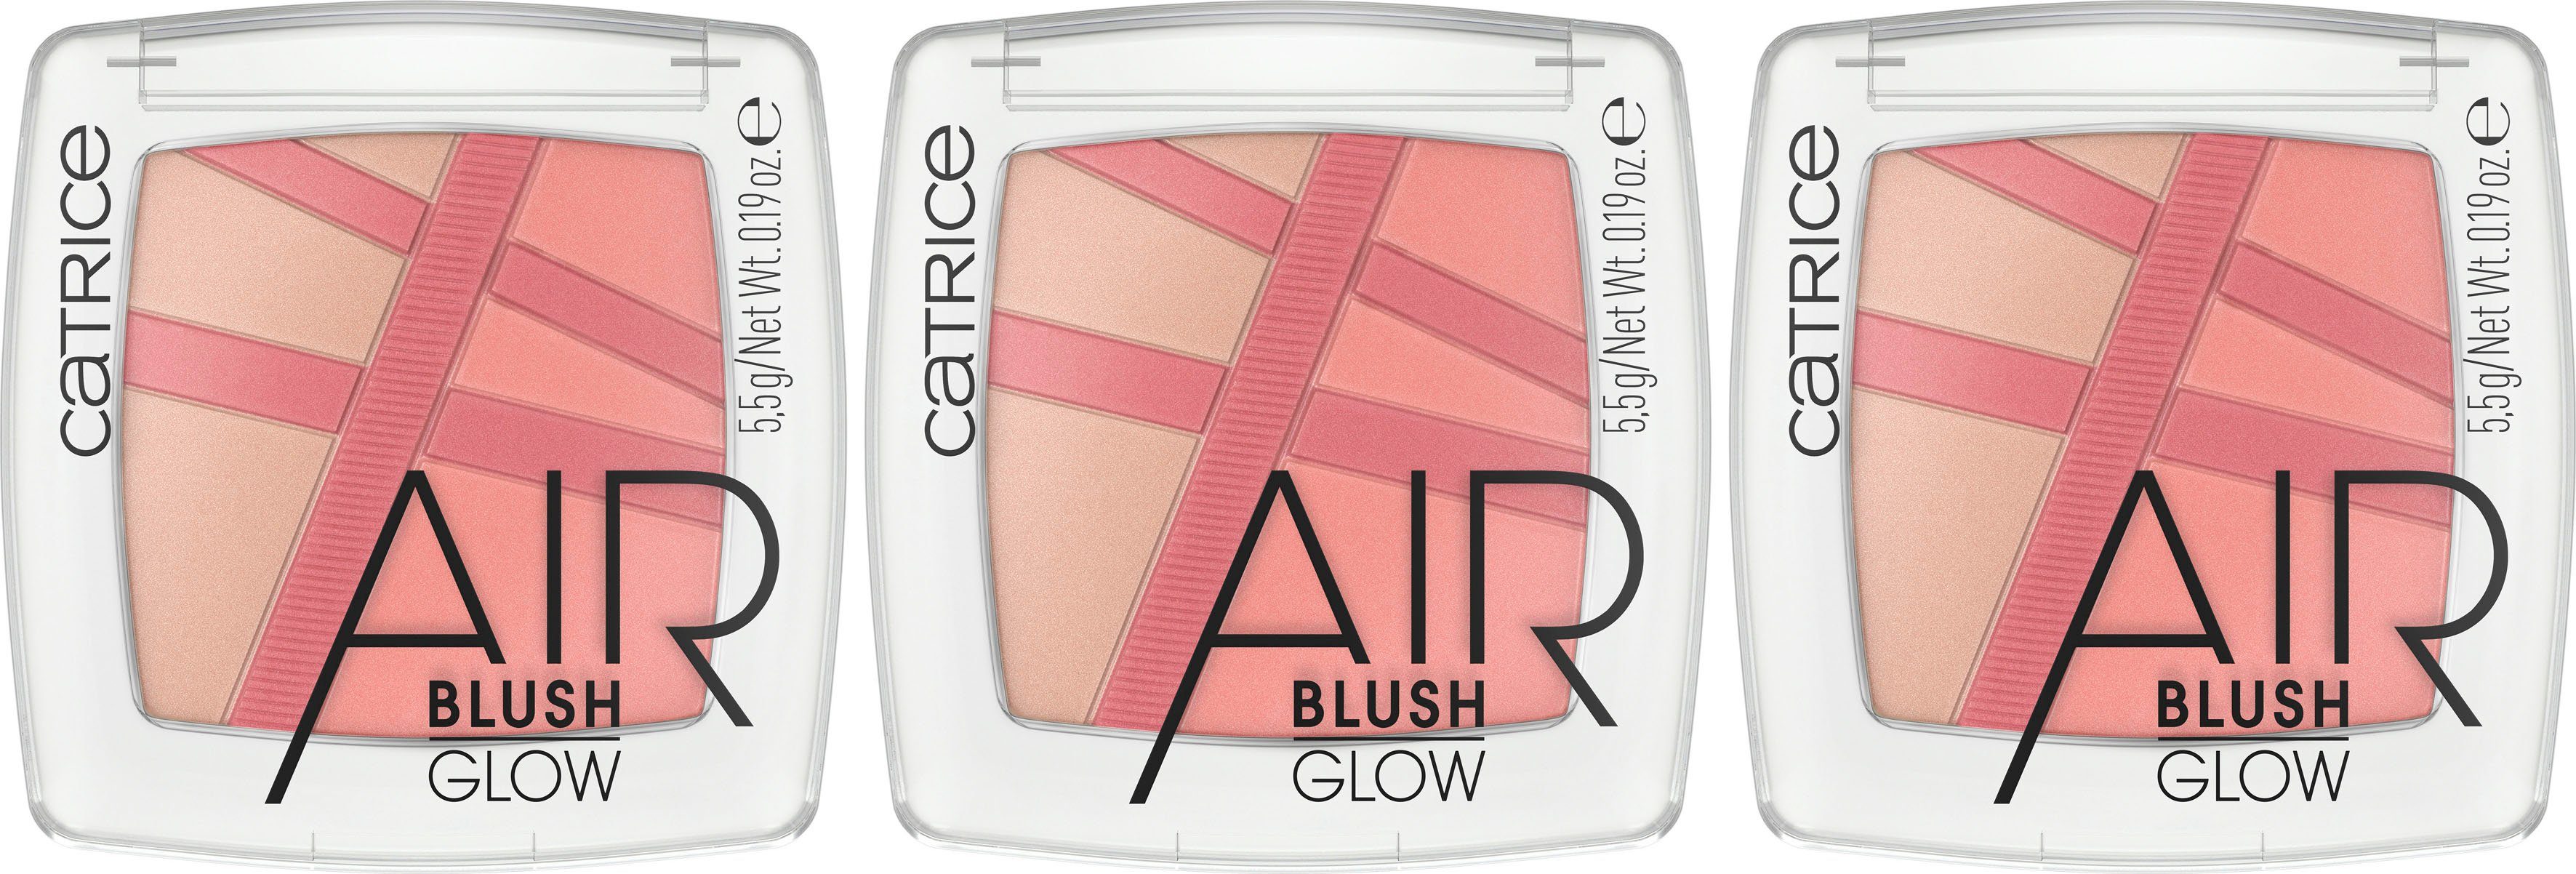 Catrice Rouge Rosy 3-tlg. AirBlush Love Catrice Glow